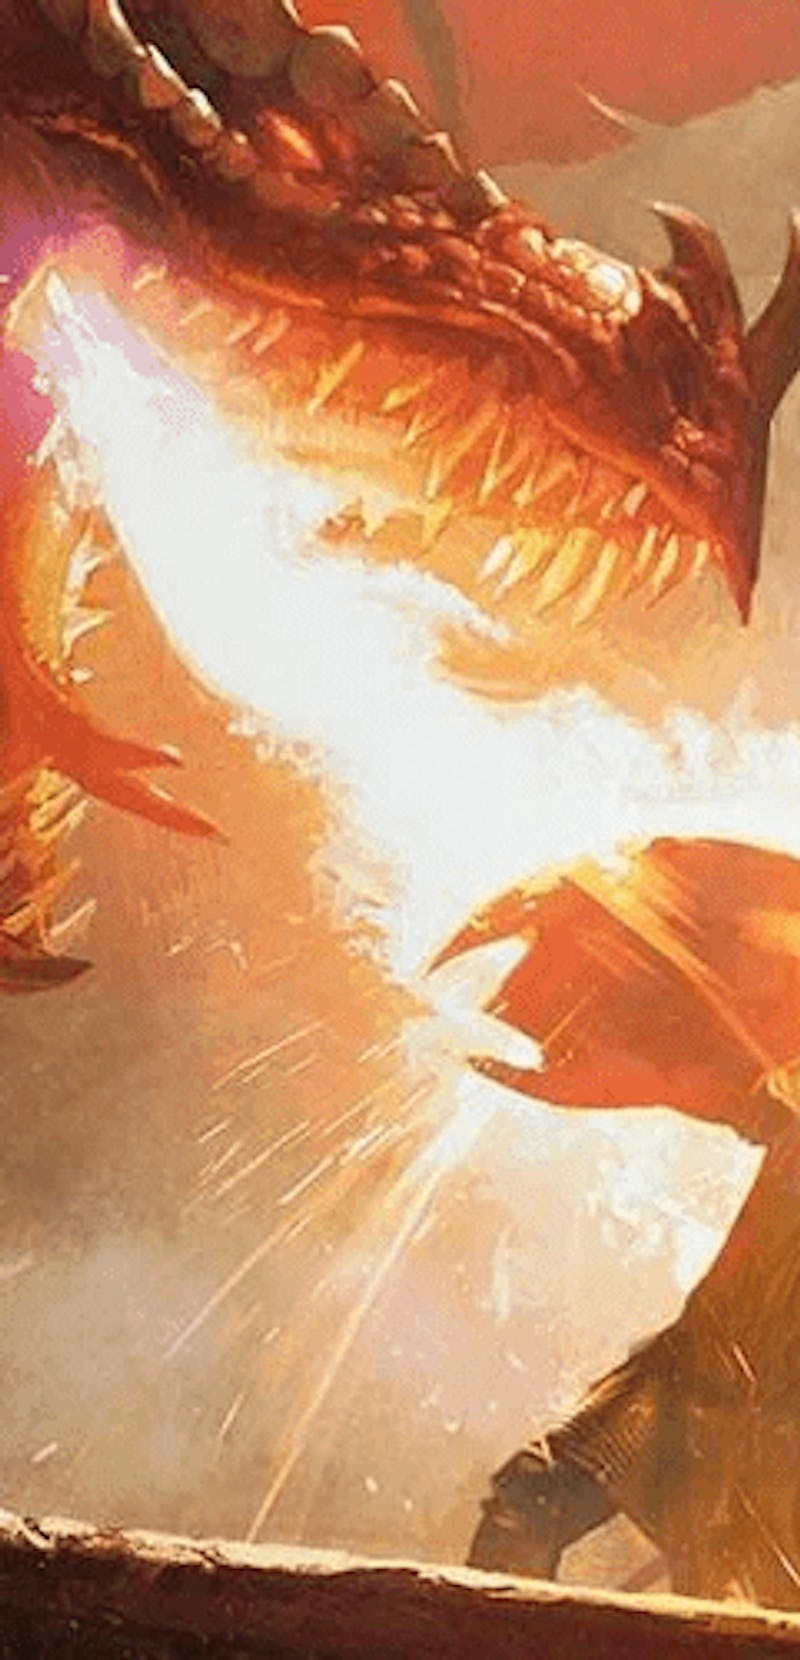 dragon breathing fire at adventurer holding shield in dungeons and dragons art